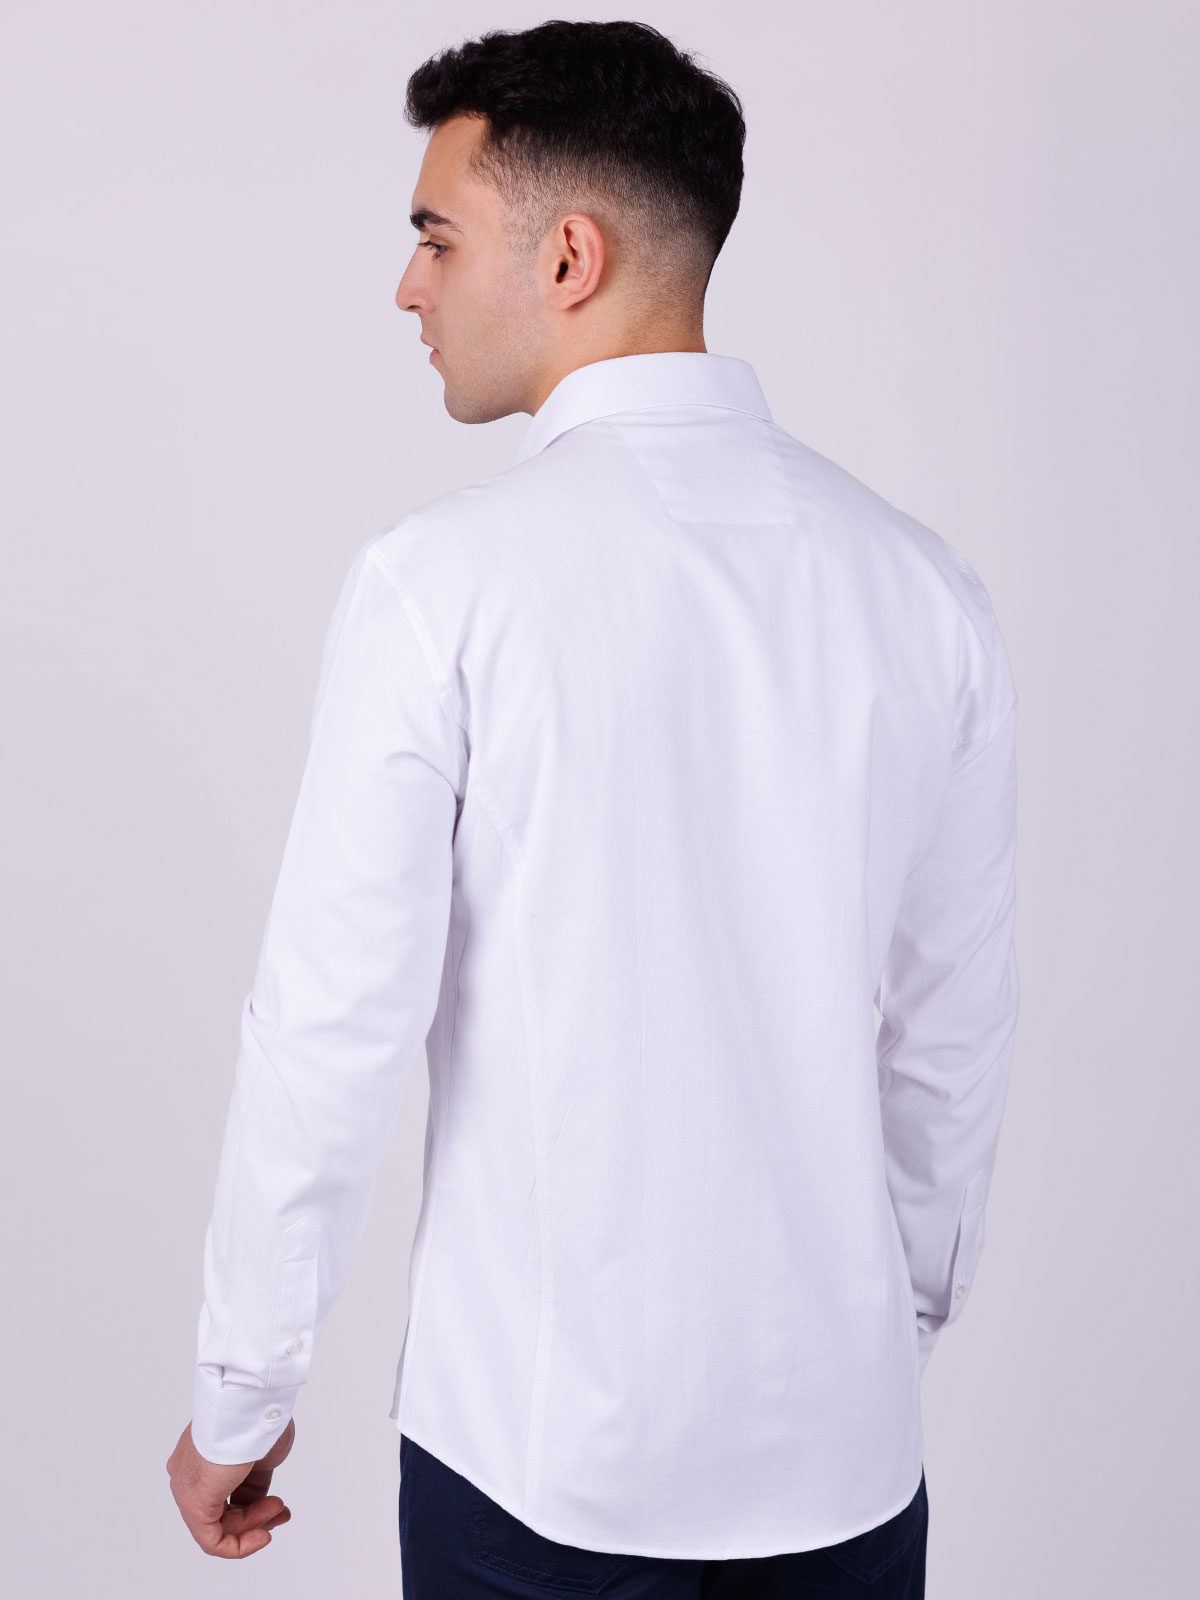 White shirt with striped relief - 21539 € 48.37 img4